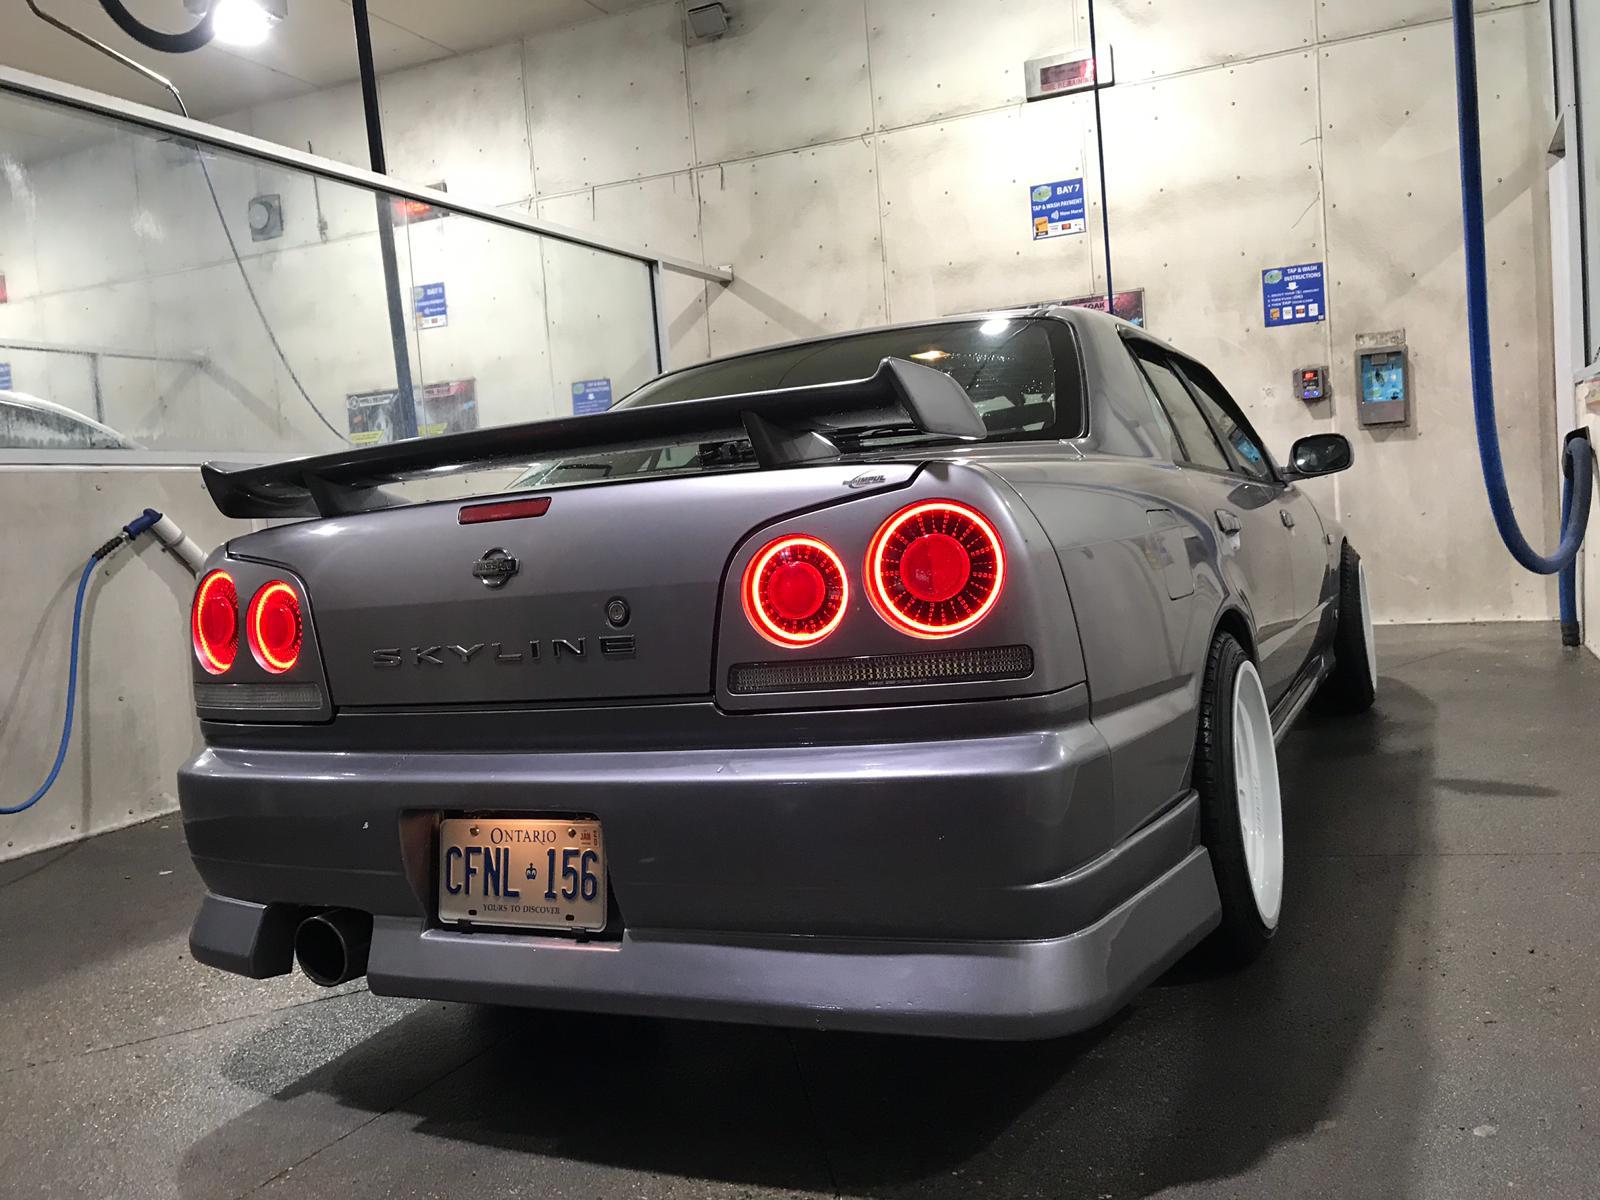 Tails R34